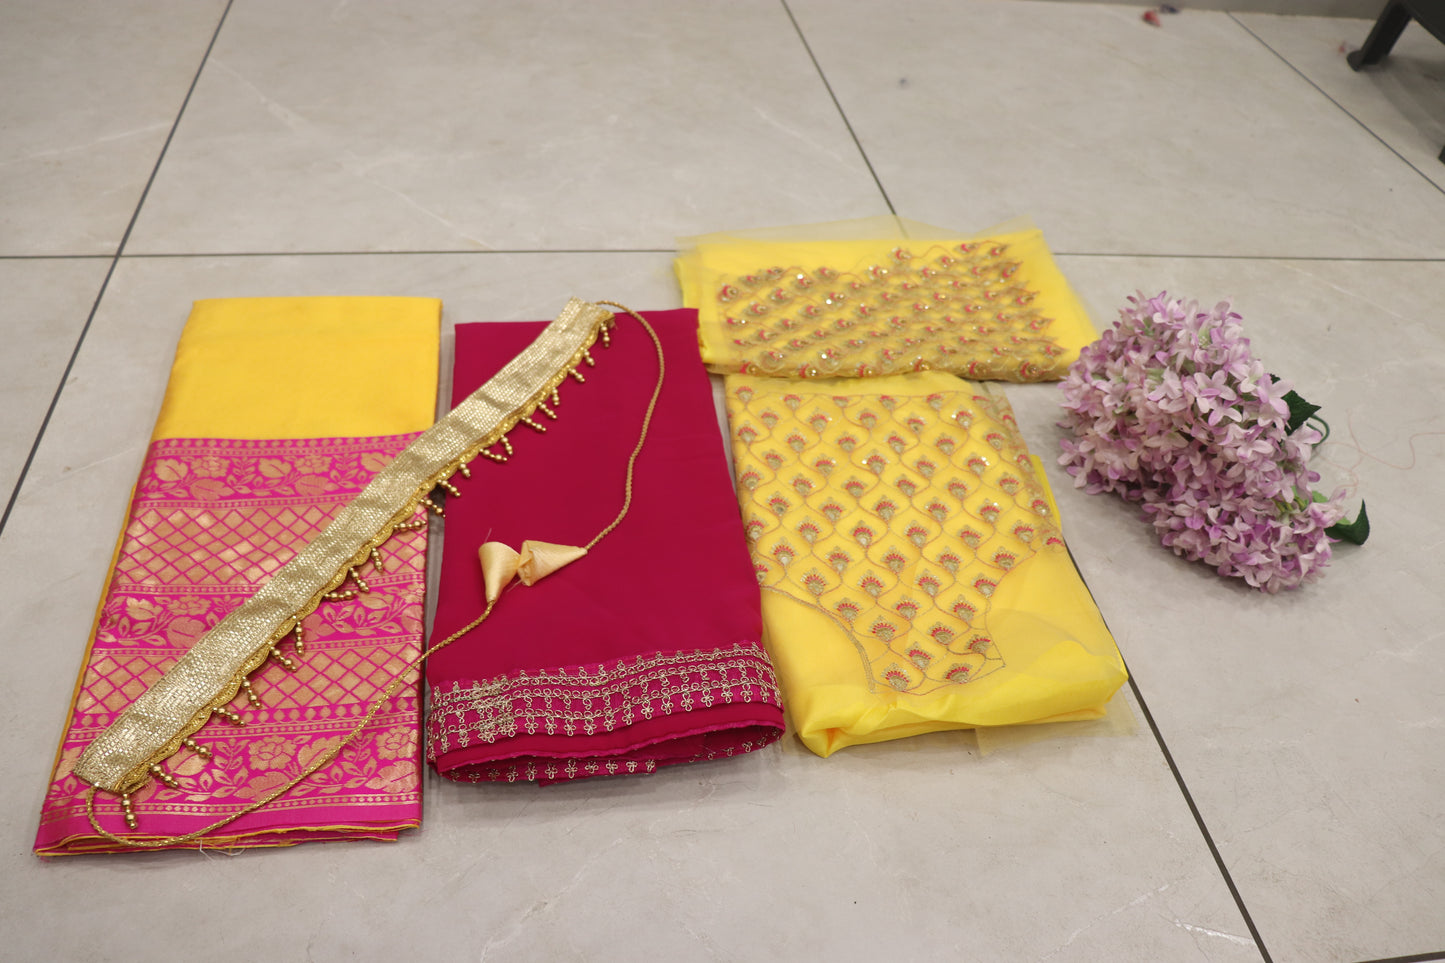 Captivating South Indian Festival Traditional Half Saree (Unstitched): Embrace Timeless Elegance! 💃✨